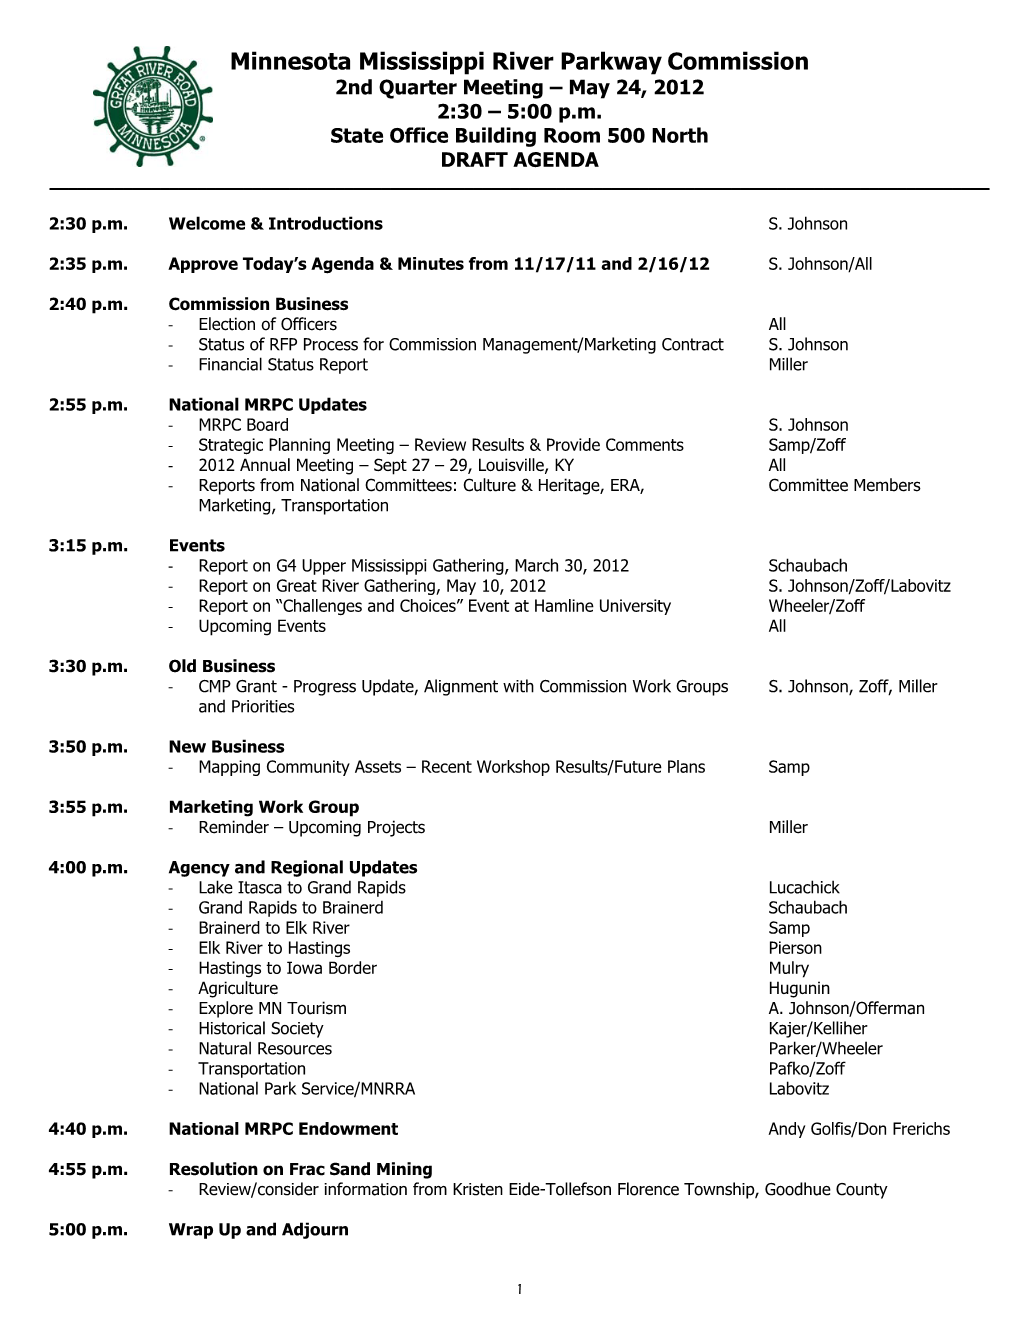 Minnesota Mississippi River Parkway Commission 2Nd Quarter Meeting – May 24, 2012 2:30 – 5:00 P.M